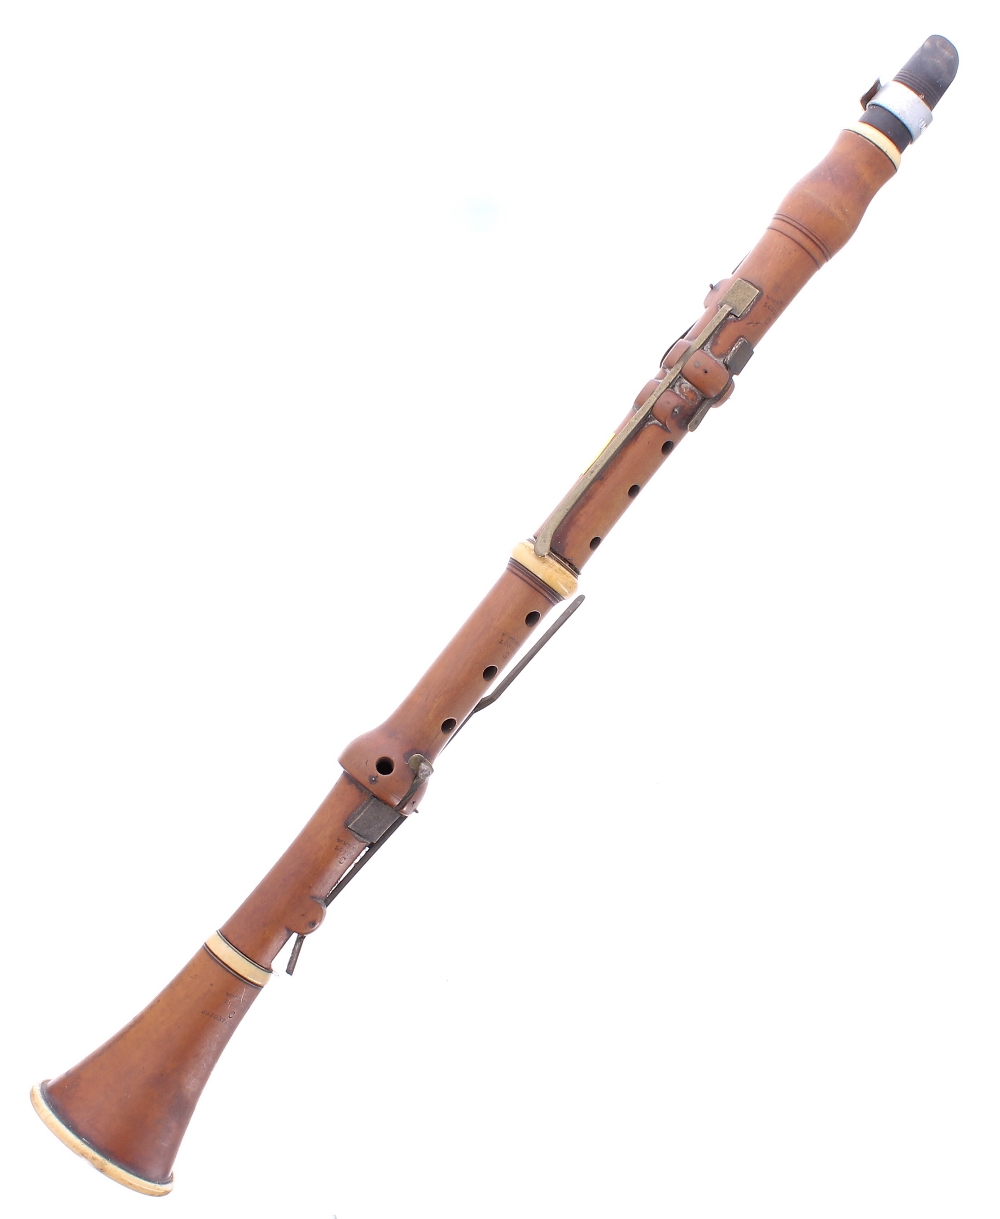 Boxwood and ivory clarinet by and stamped W. Milhouse, London, 337 Oxford St (C), with six square